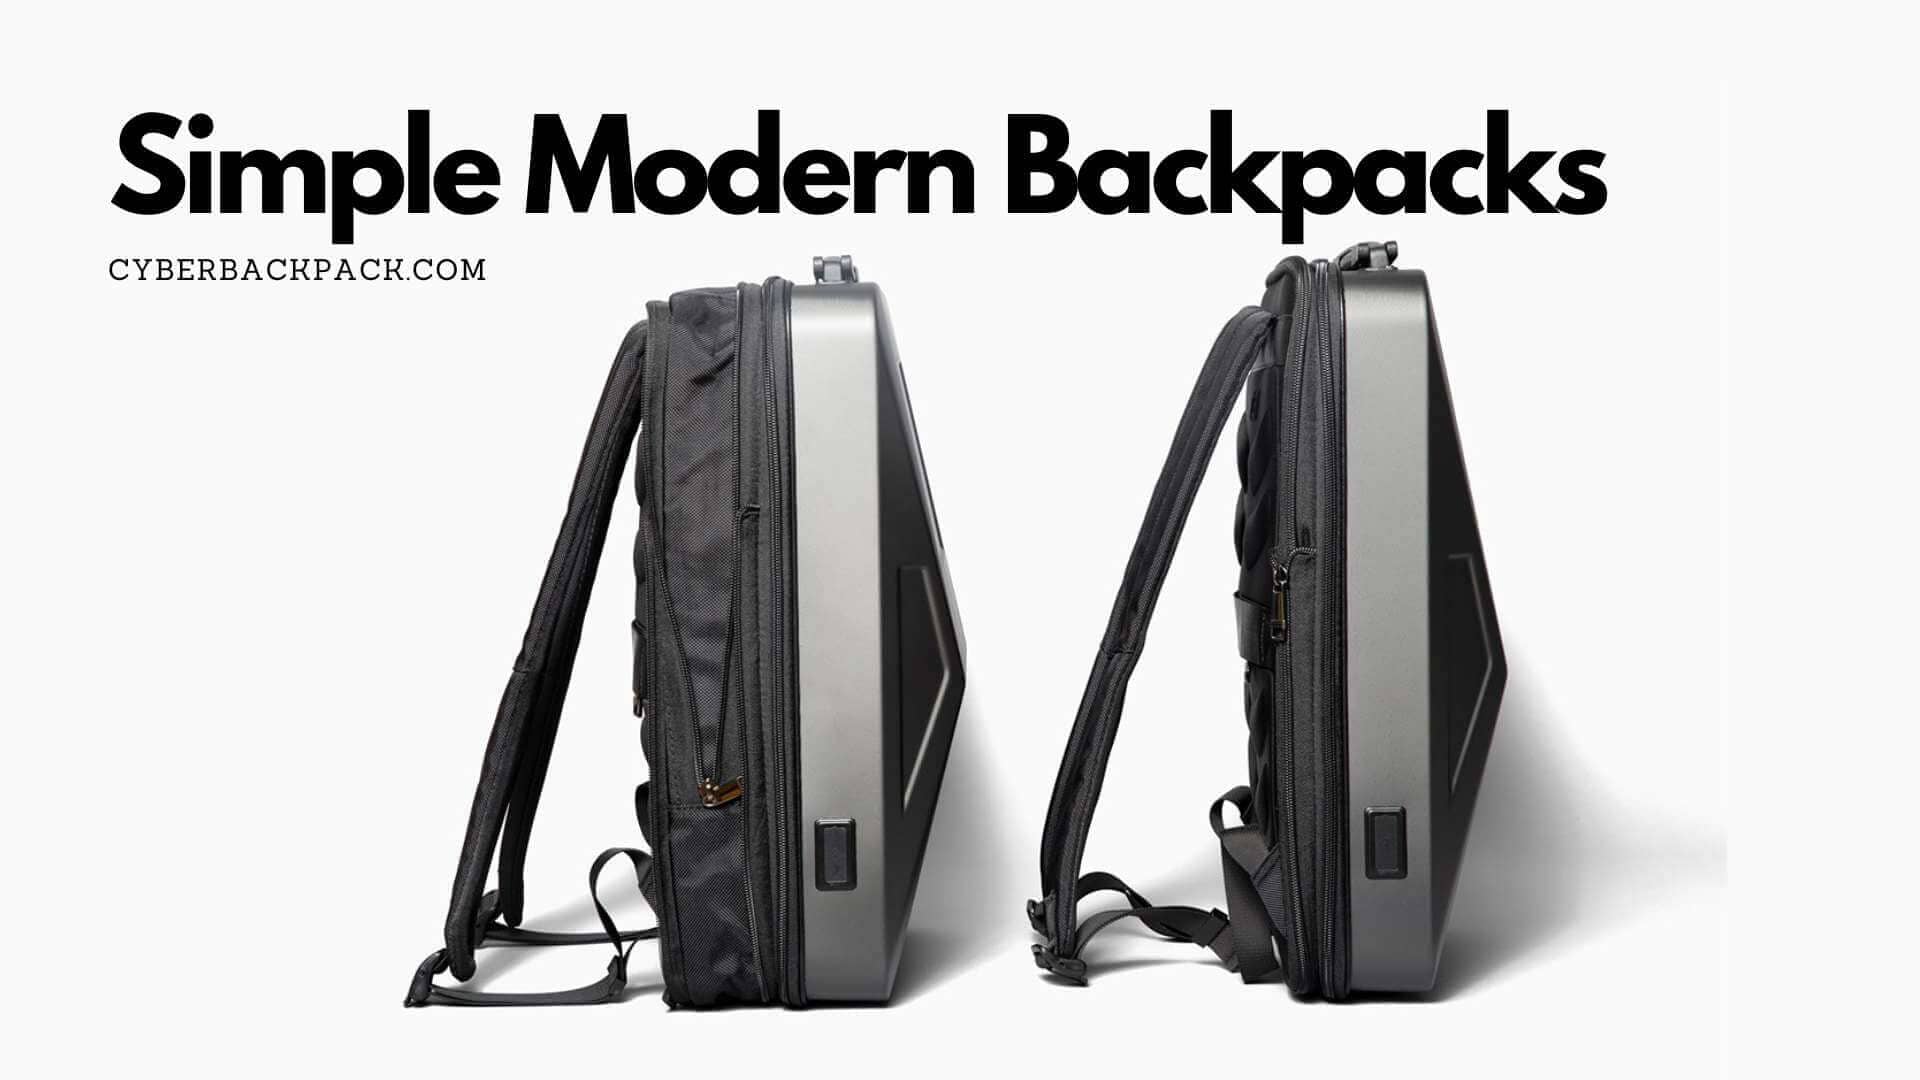 Simple Modern Backpack: A Comprehensive Guide to the Cyberbackpack and